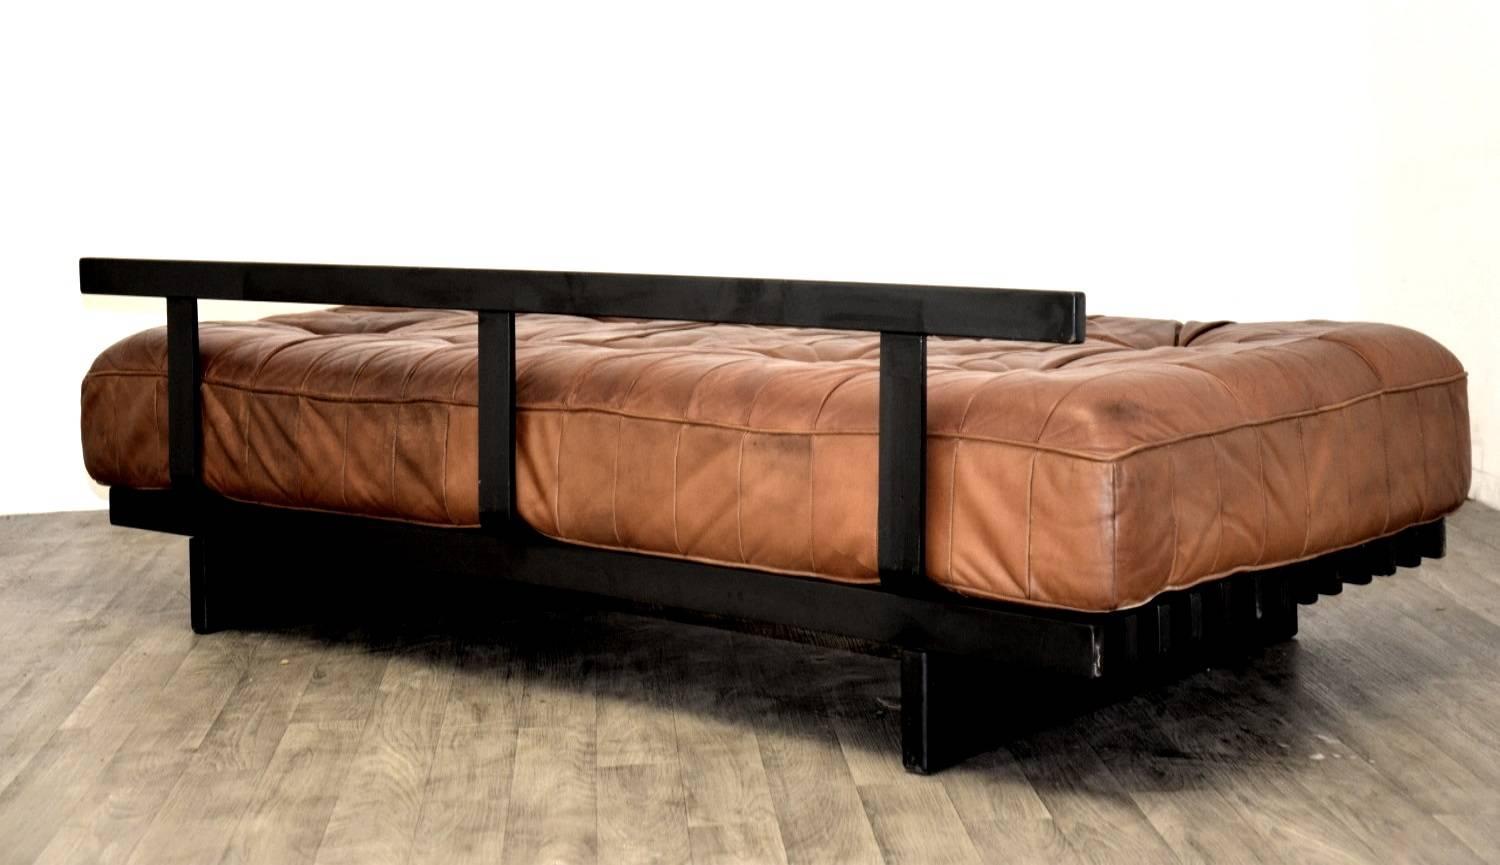 Vintage Swiss De Sede DS 80 Leather Daybed, 1960s For Sale 1